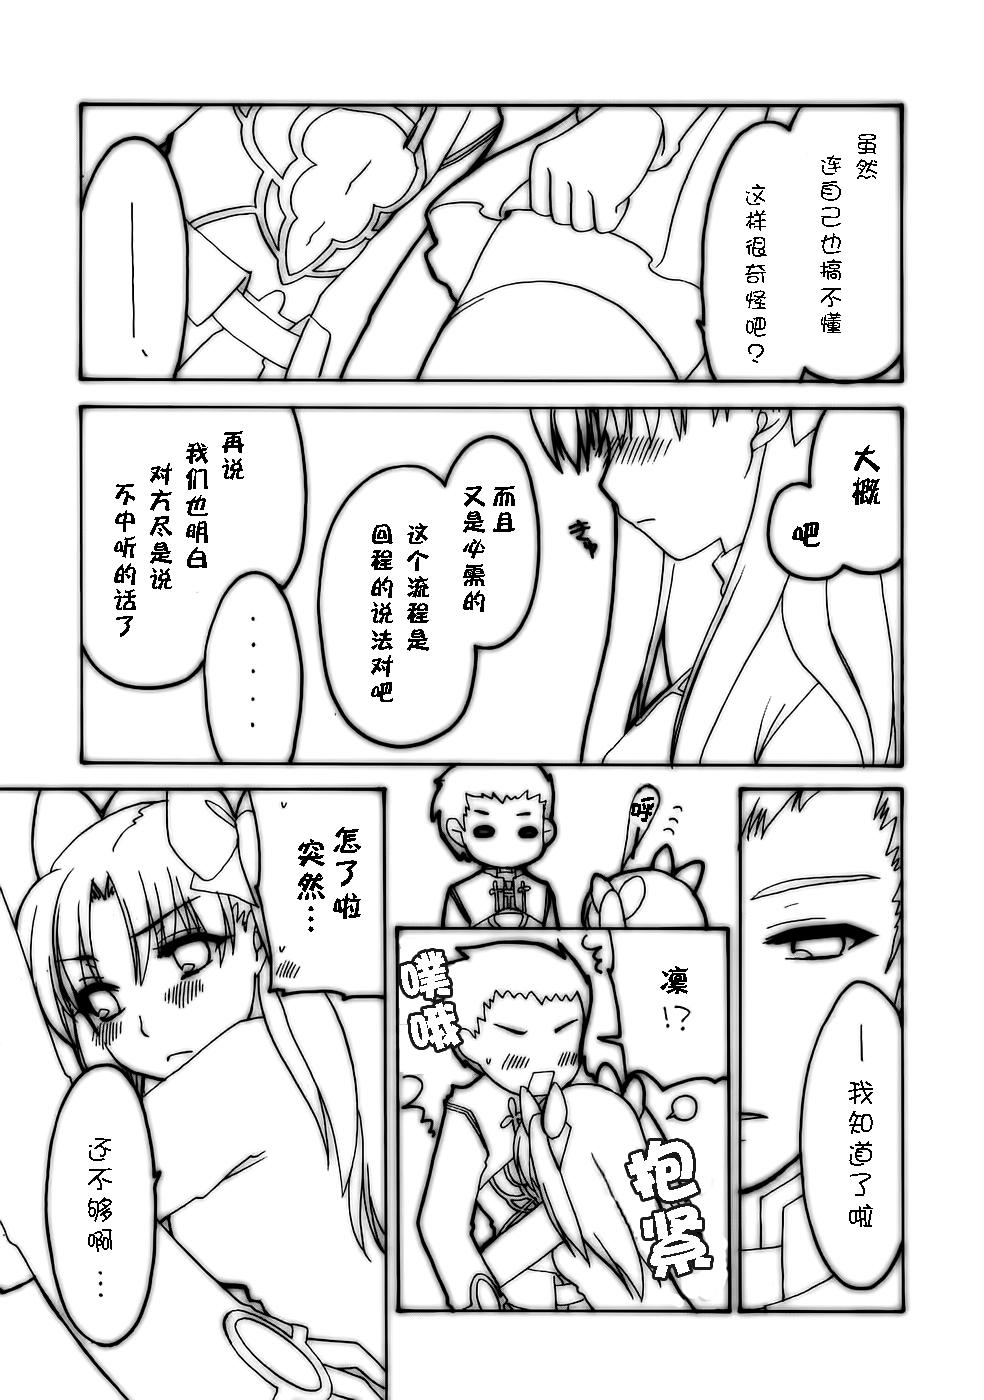 Girl Shrouded in Red - Fate stay night Gaydudes - Page 10